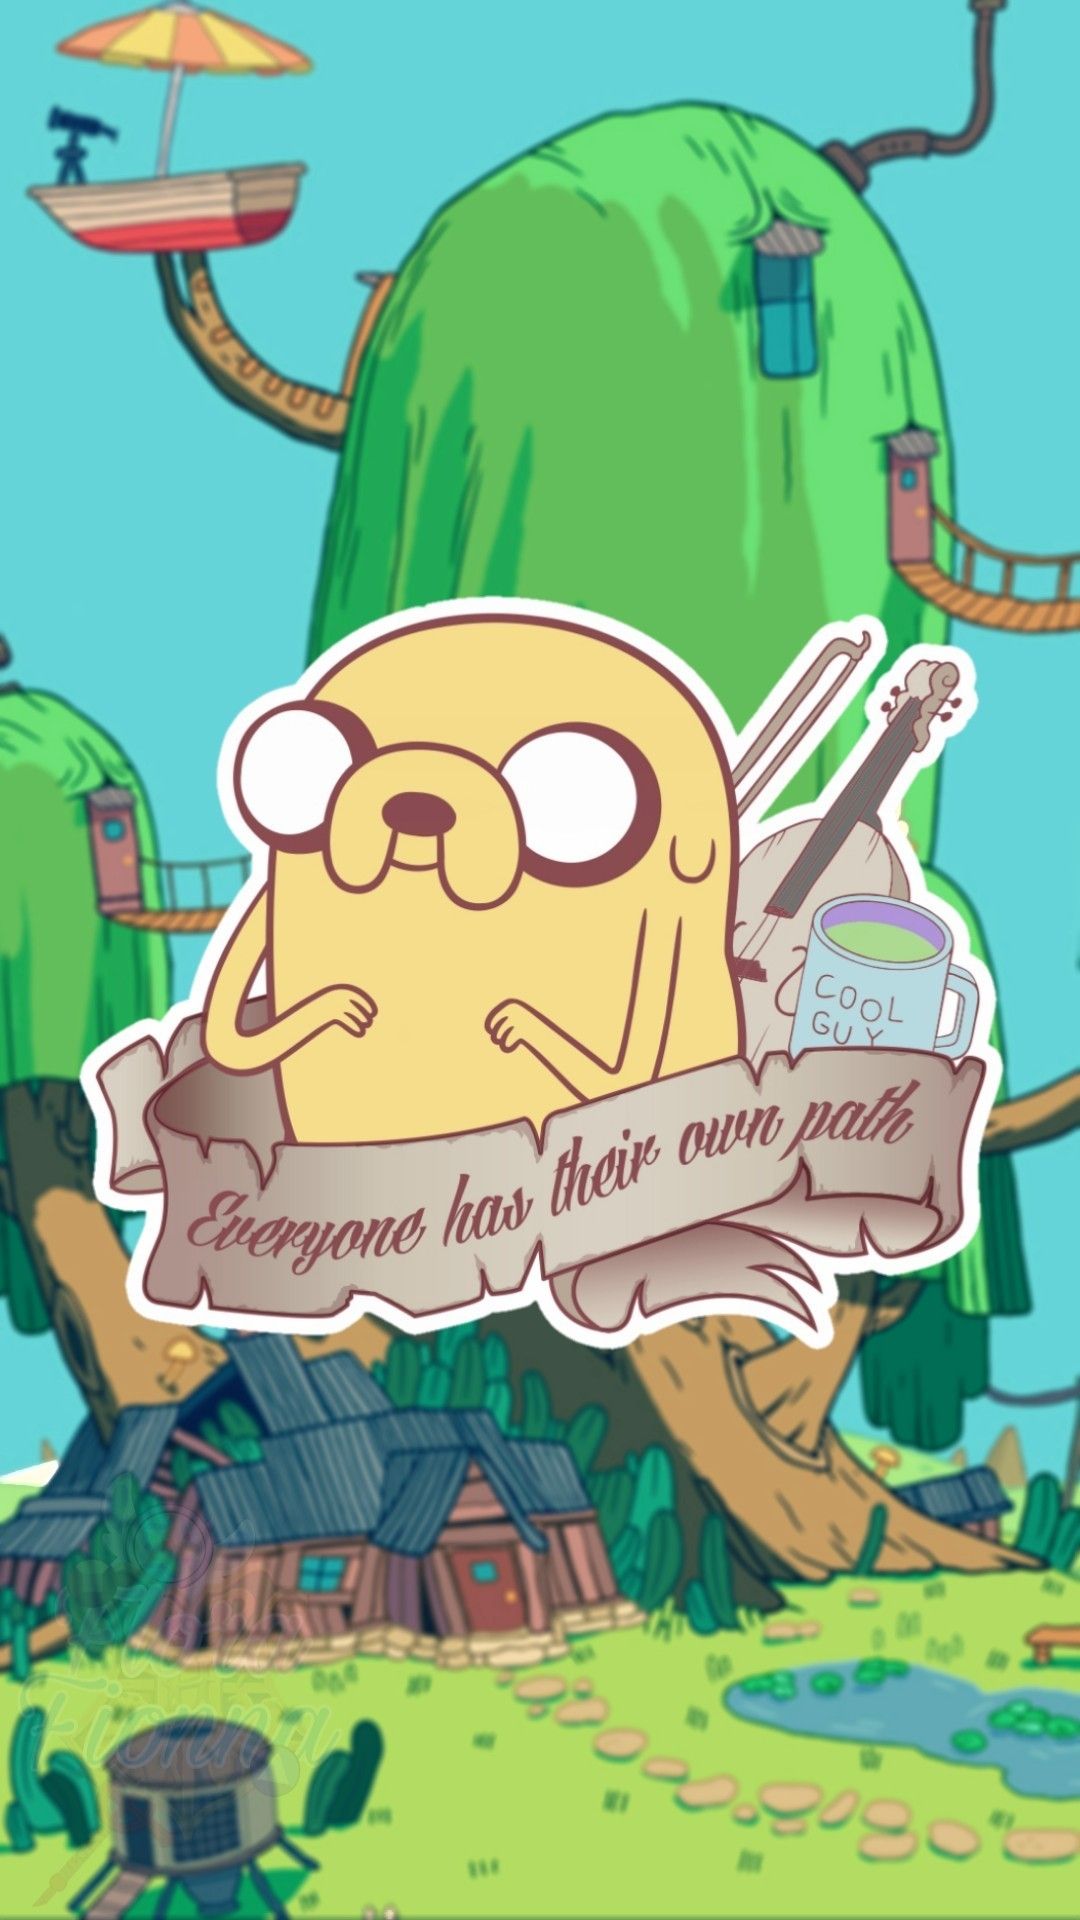 Aesthetic Adventure Time Wallpaper Android Download, Time Treehouse Wallpaper & Background Download